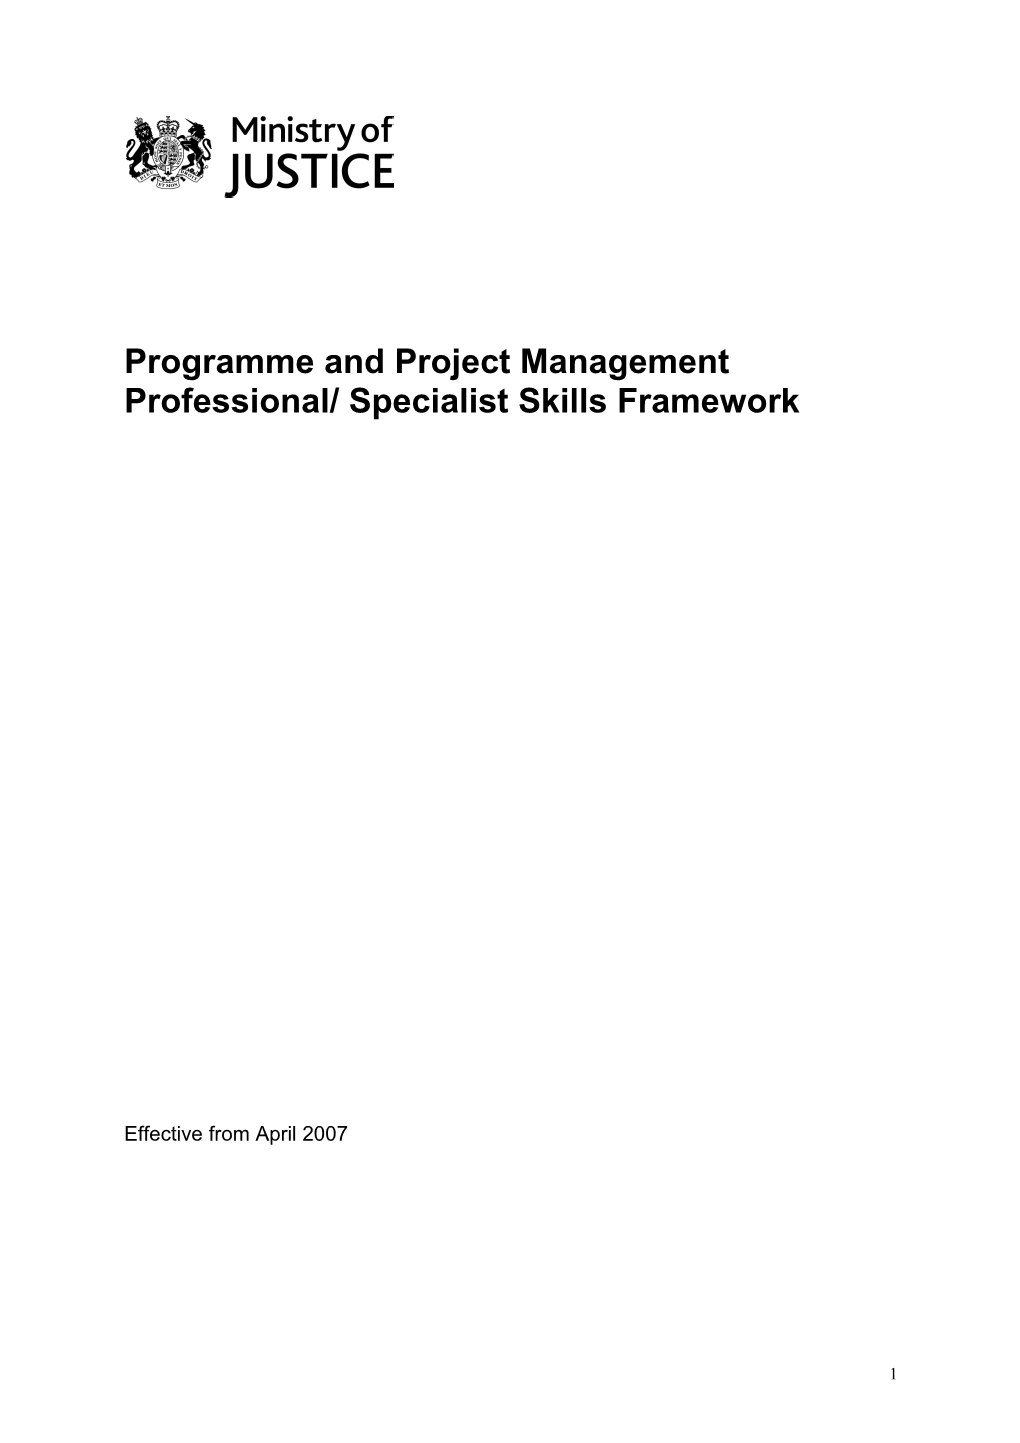 Programme and Project Management Professional Specialist Skills Framework